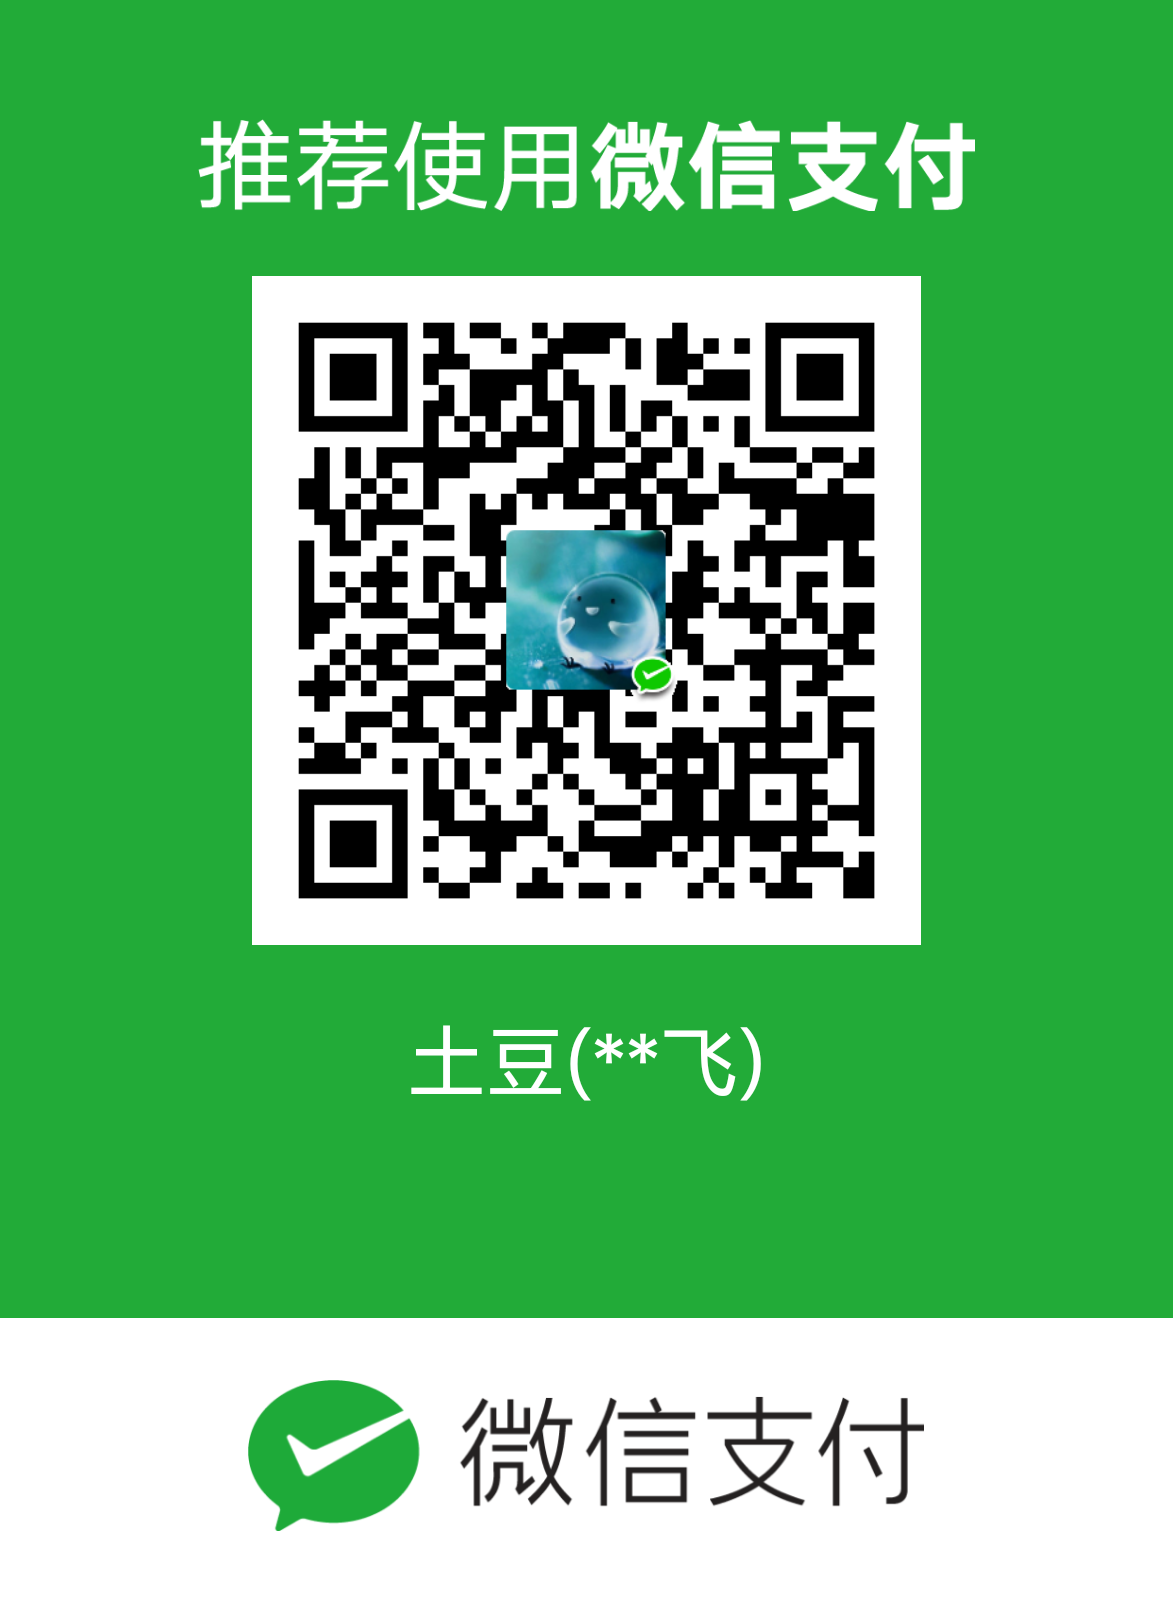 wechat_charge_qr.png